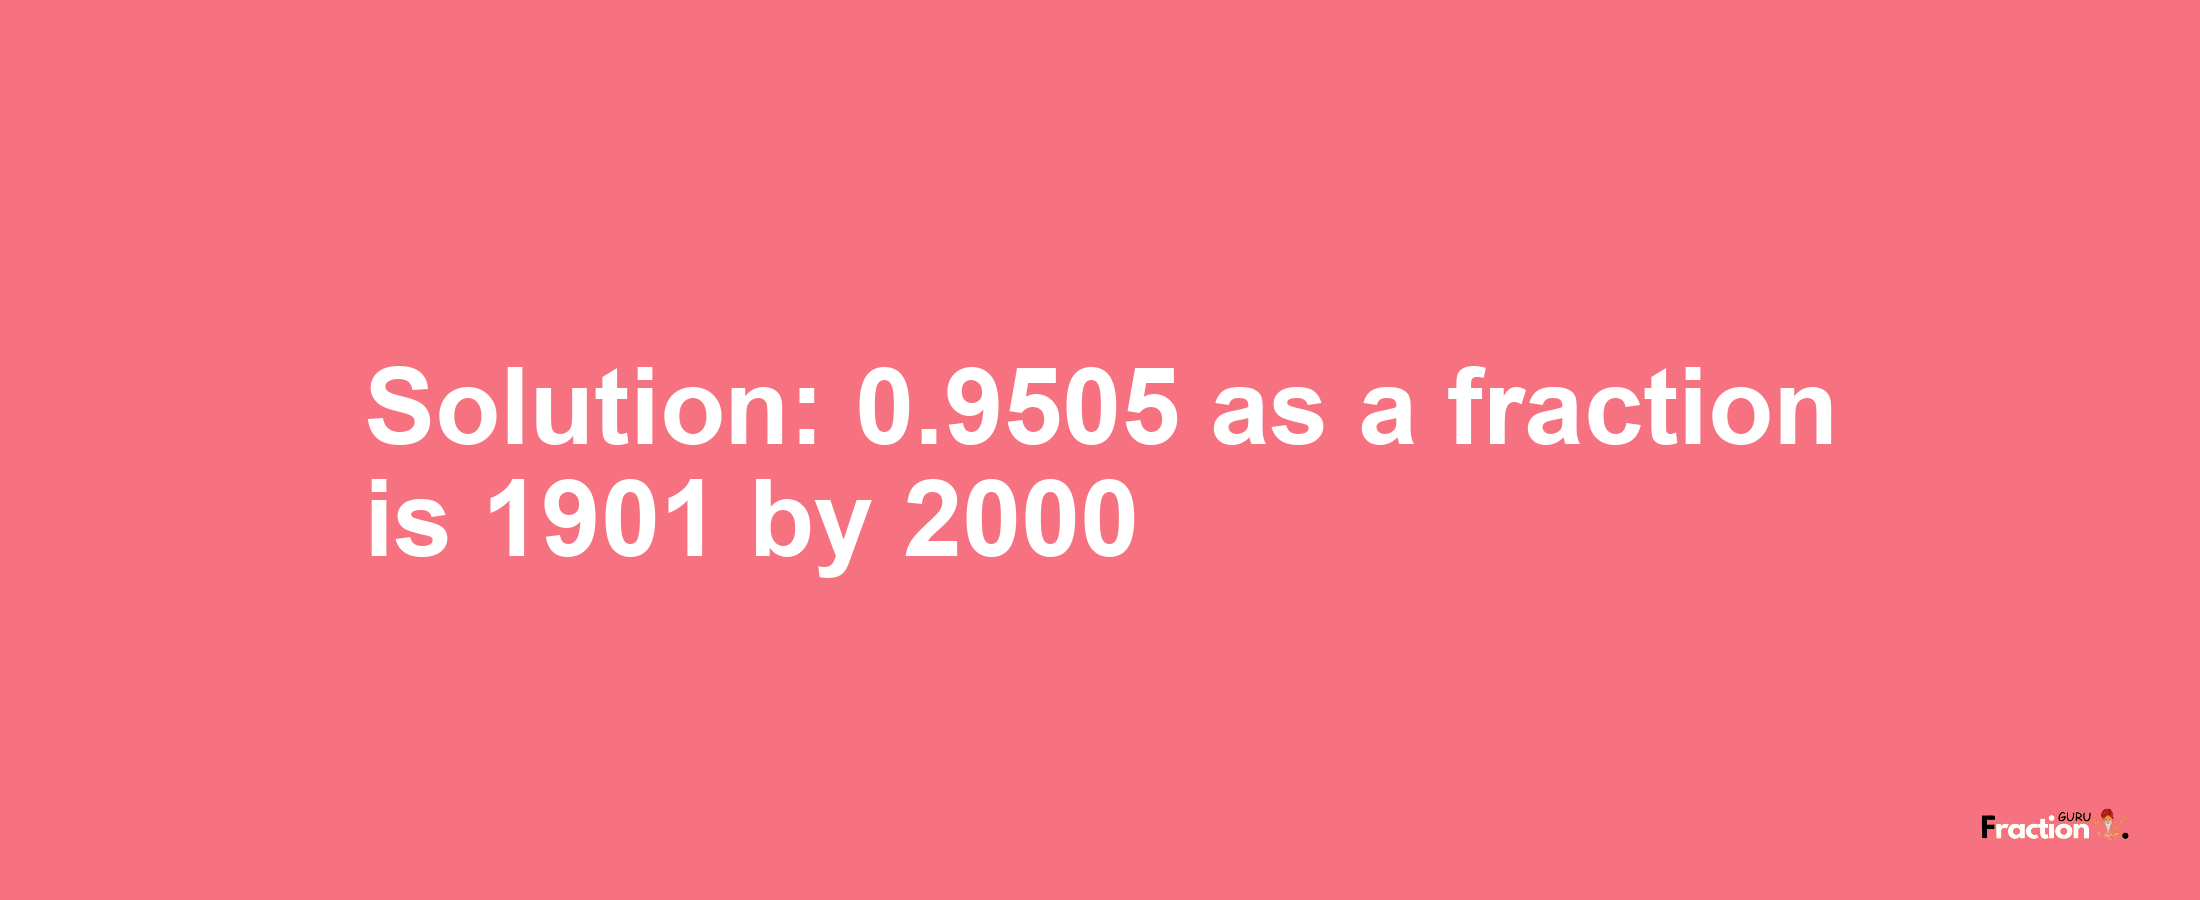 Solution:0.9505 as a fraction is 1901/2000